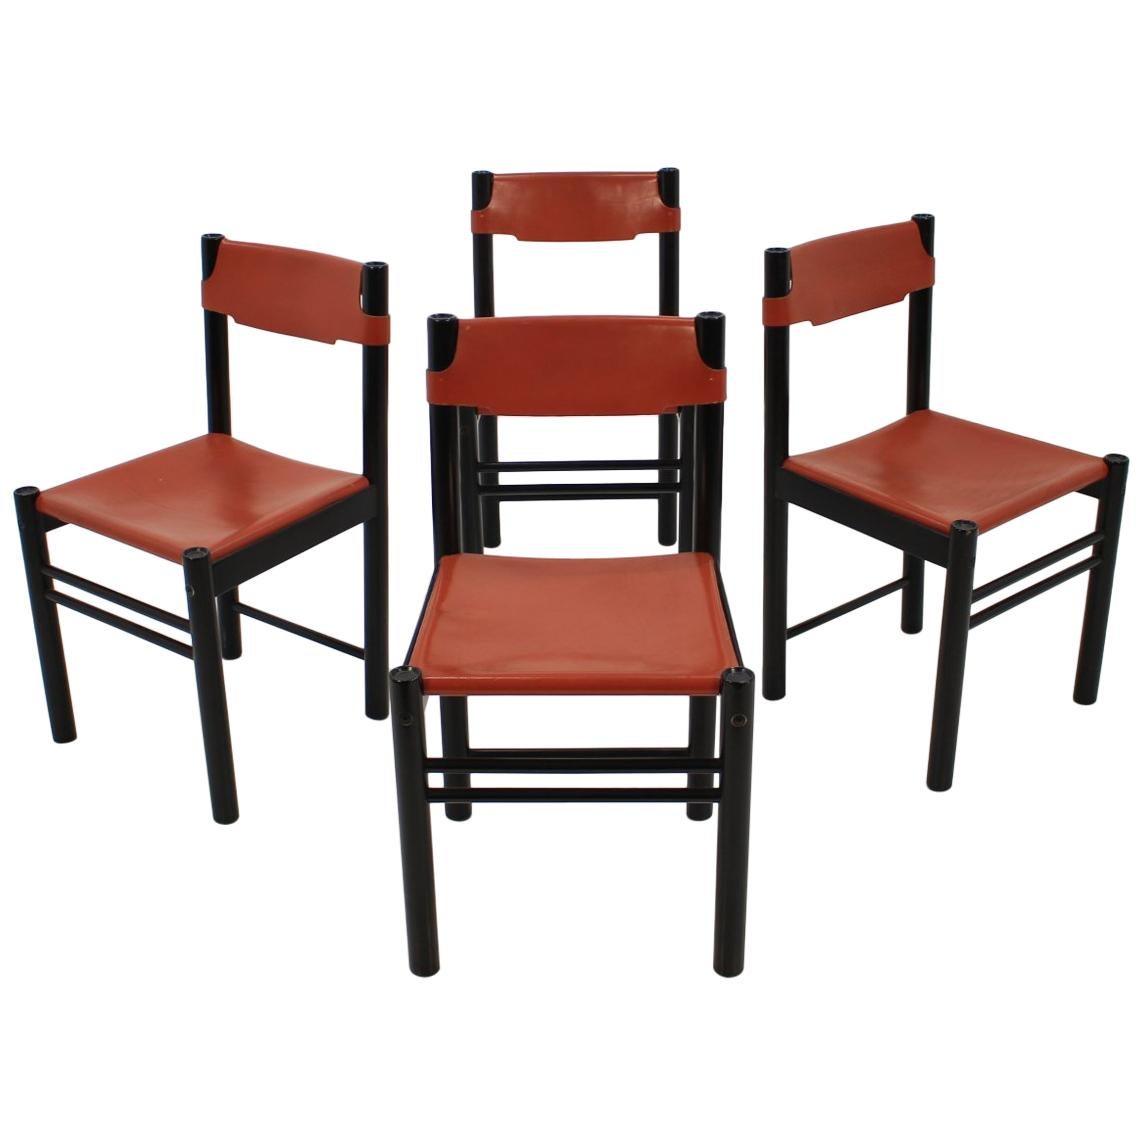 1970s Ibisco Italian Leather Dining Chairs, Set of 4